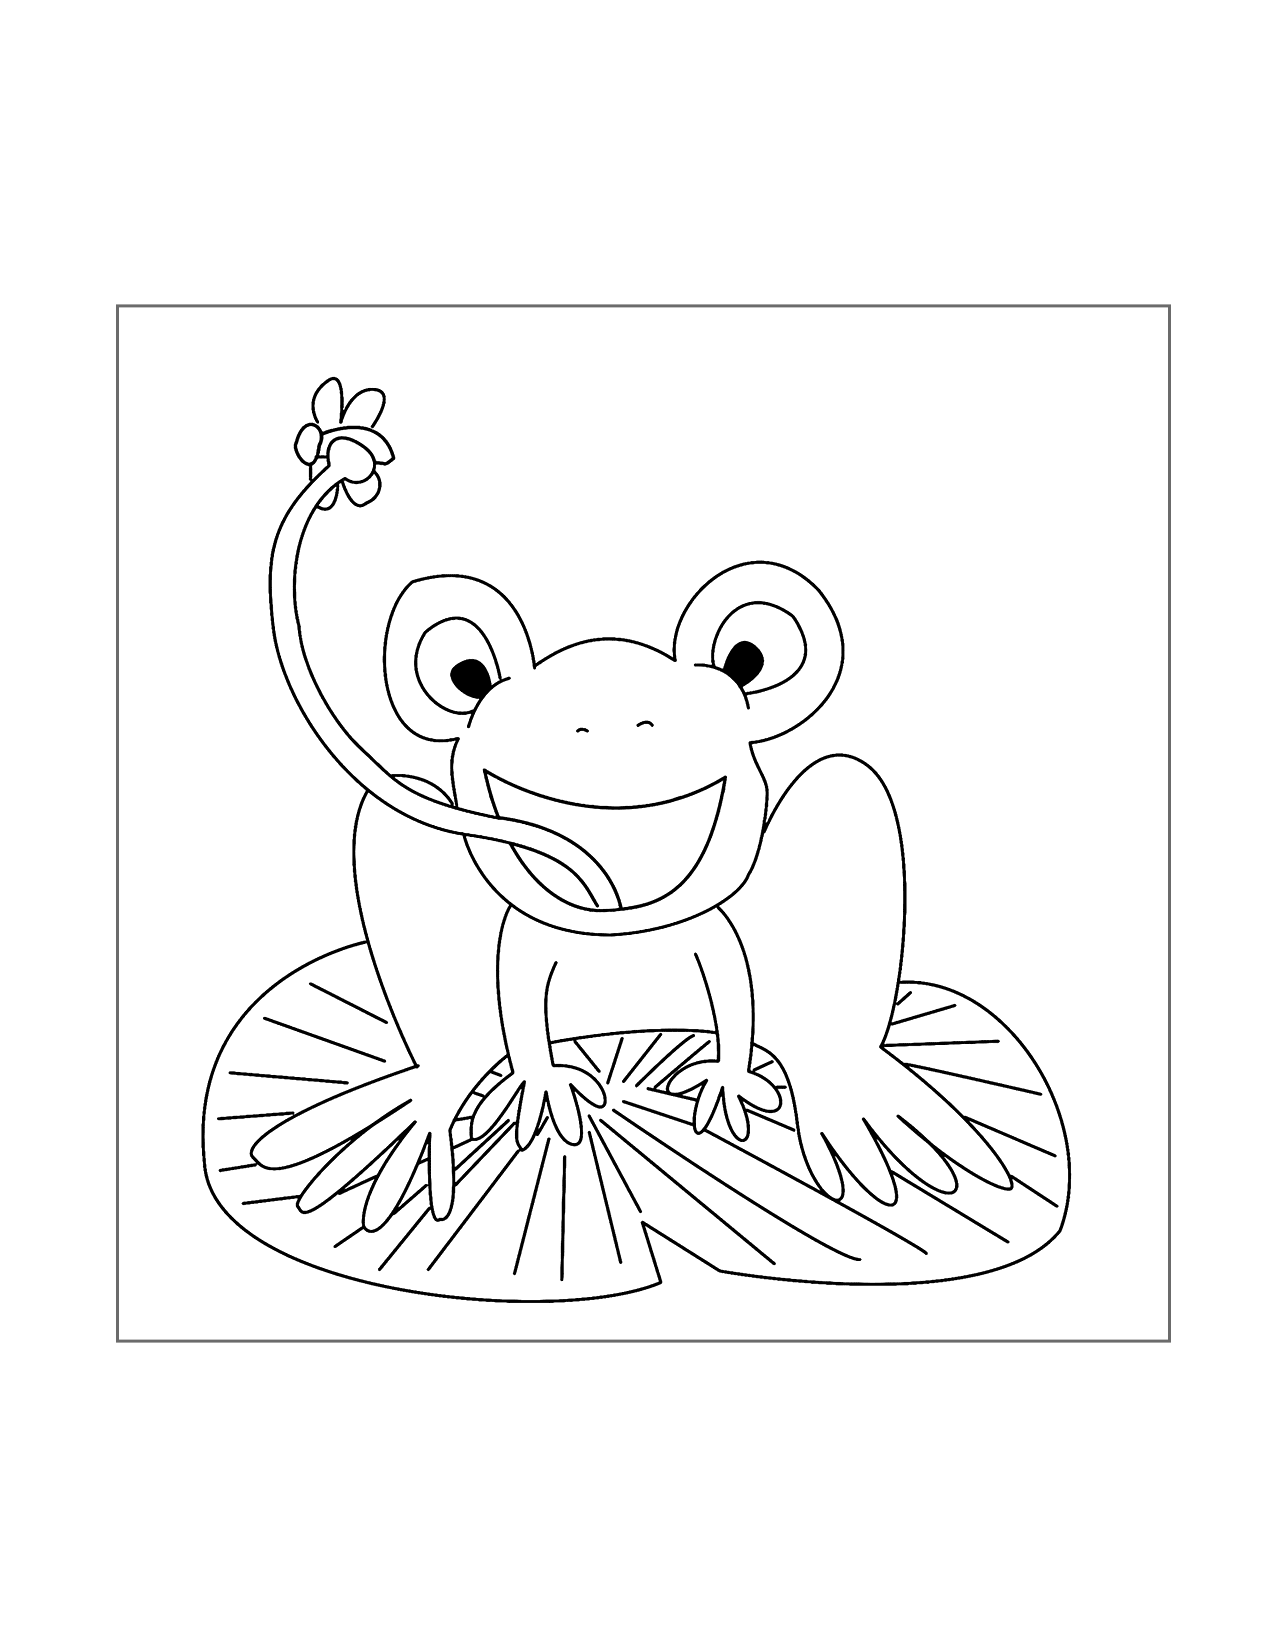 Frog Catching Fly Coloring Page